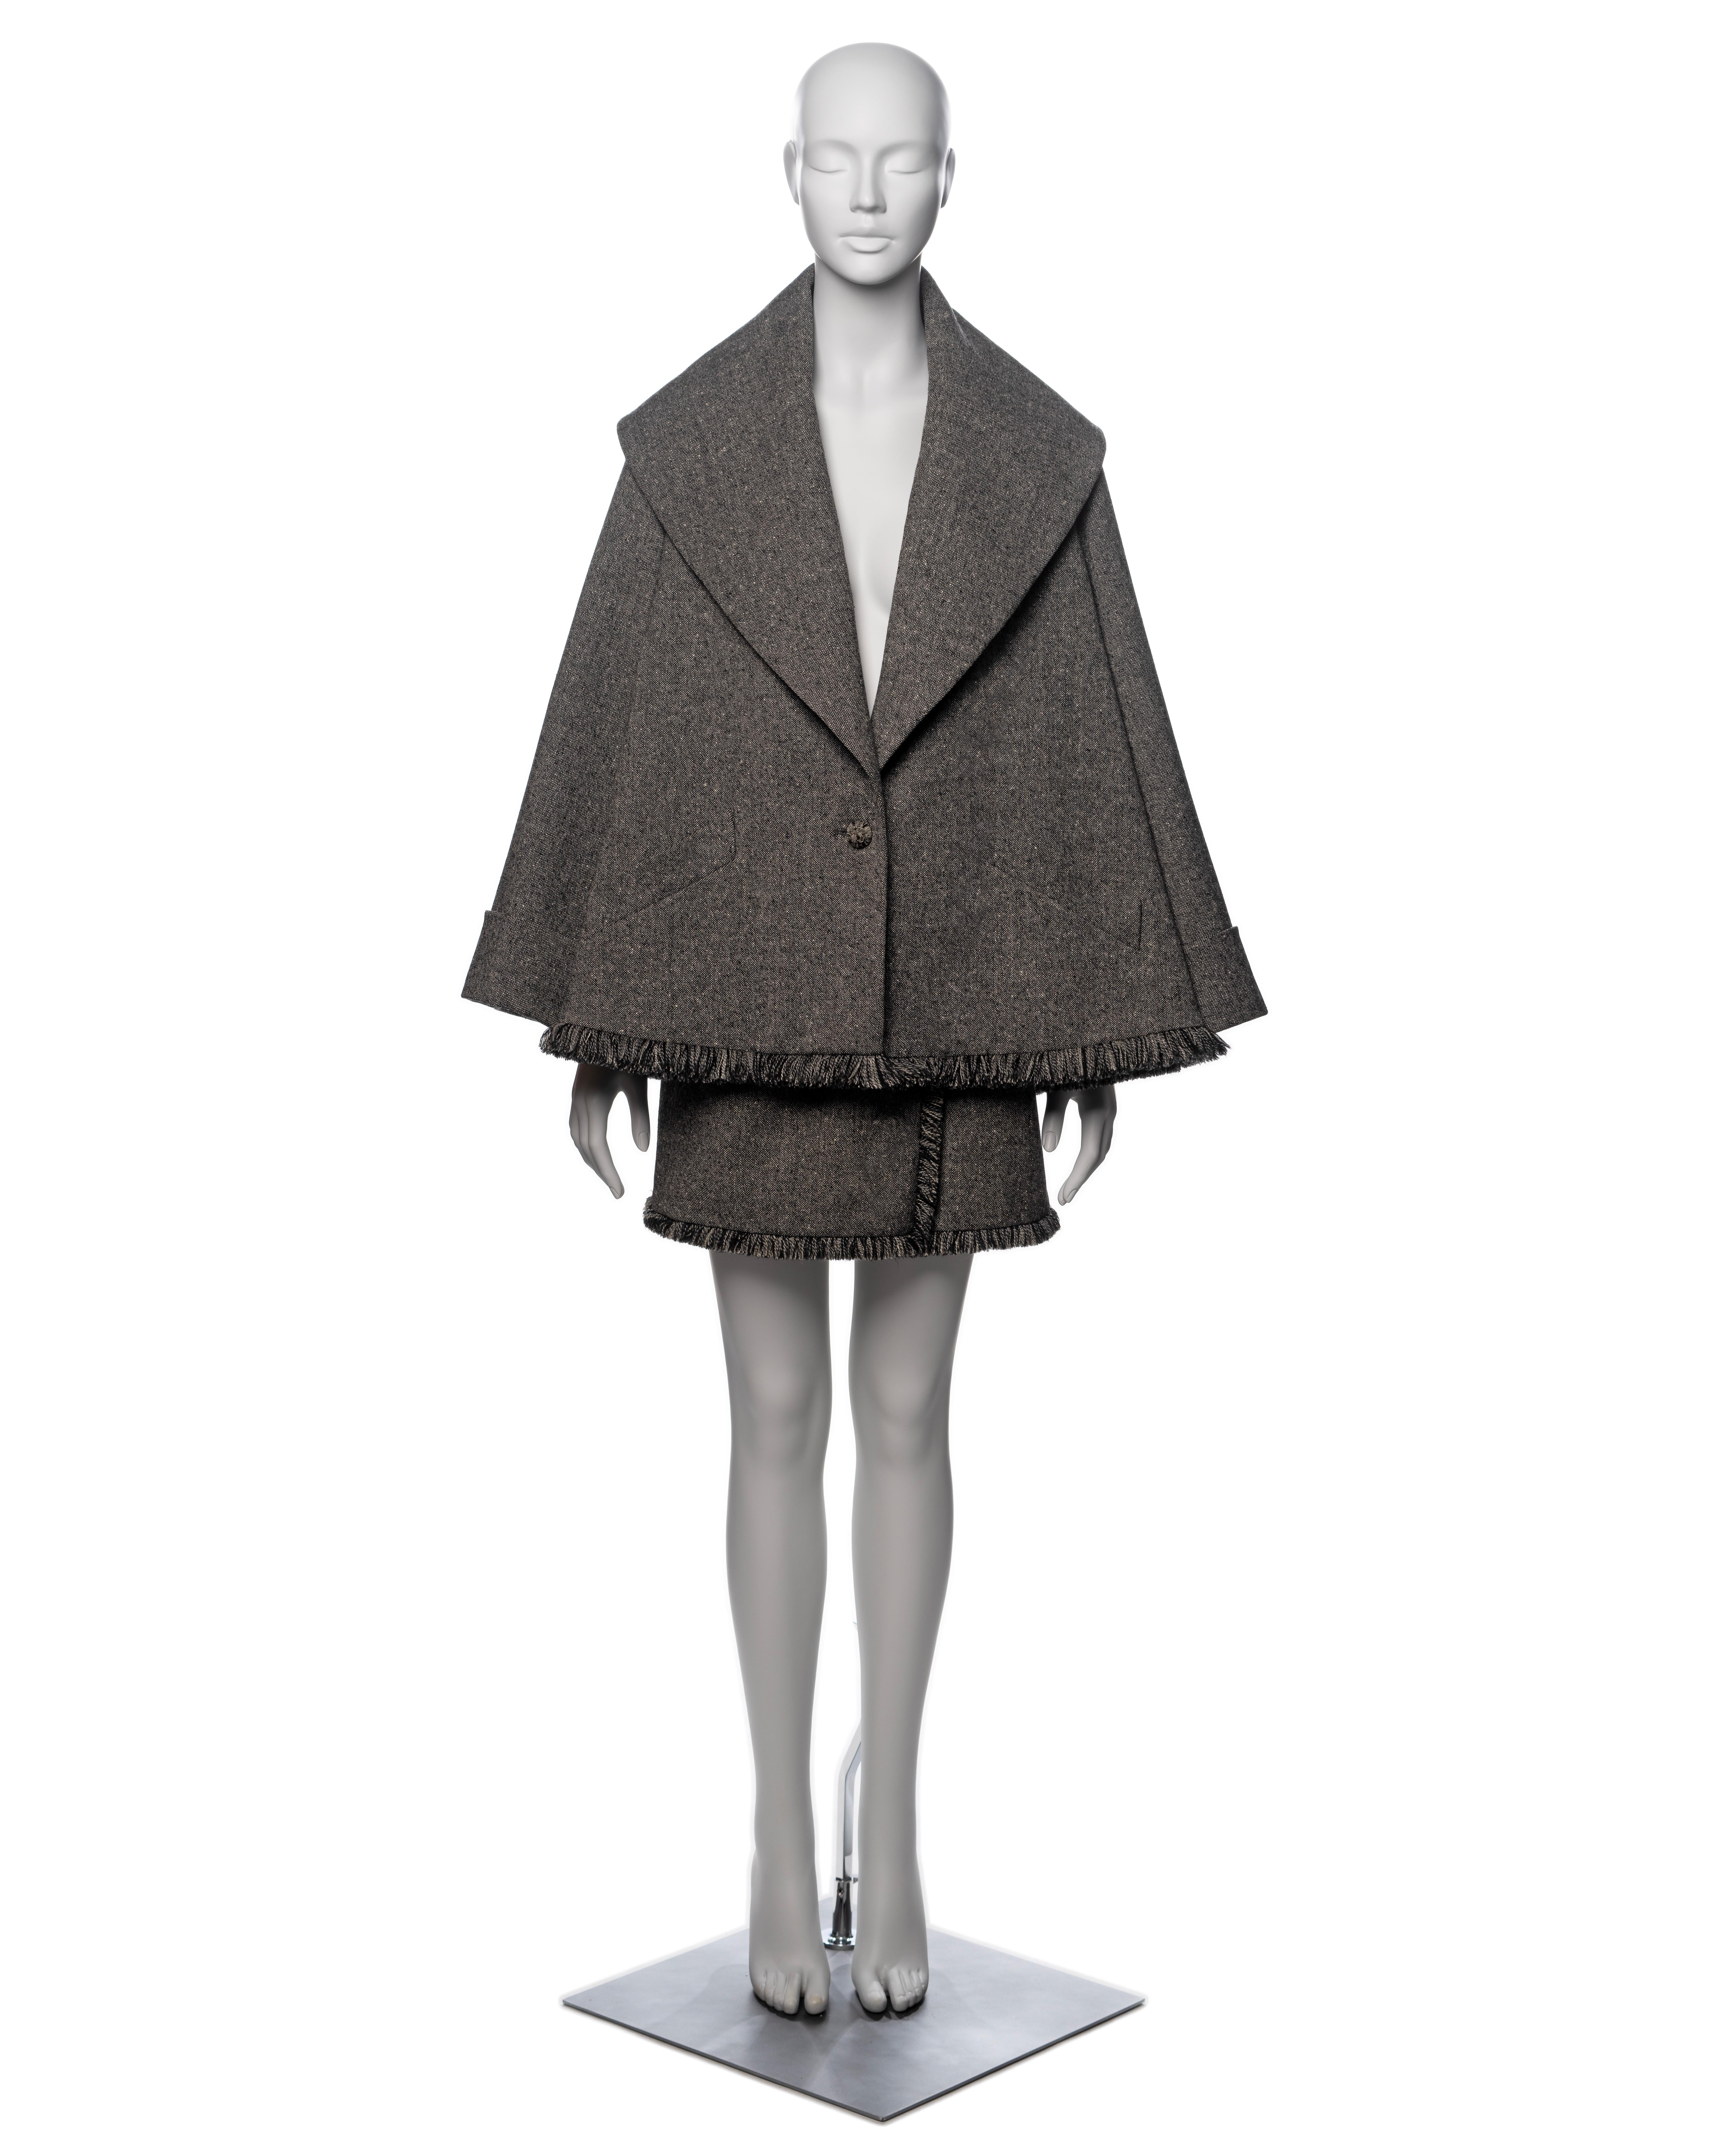 ▪ Brand: Christian Dior
▪ Creative Director: John Galliano
▪ Collection: Fall-Winter 1998
▪ Sold by: One of a Kind Archive
▪ Fabric: Grey Wool Tweed, Cream Silk Lining
▪ Details: Extra large shawl lapel, fringe trim
▪ Size: Jacket; FR36 - UK8 - US4